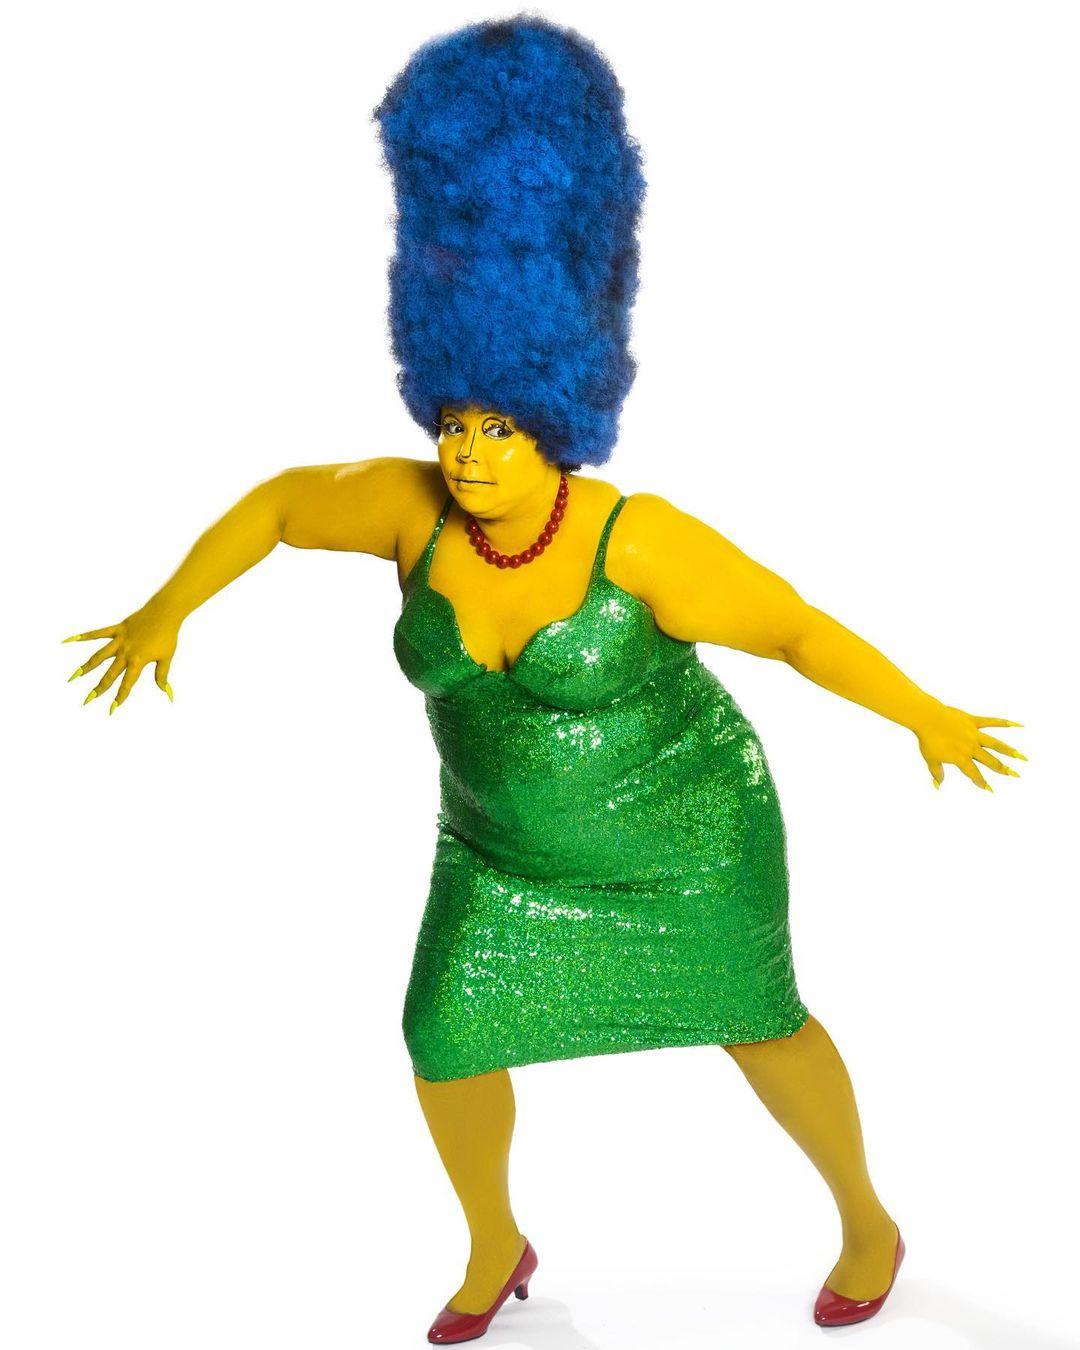 Lizzo as Marge Simpson for Halloween